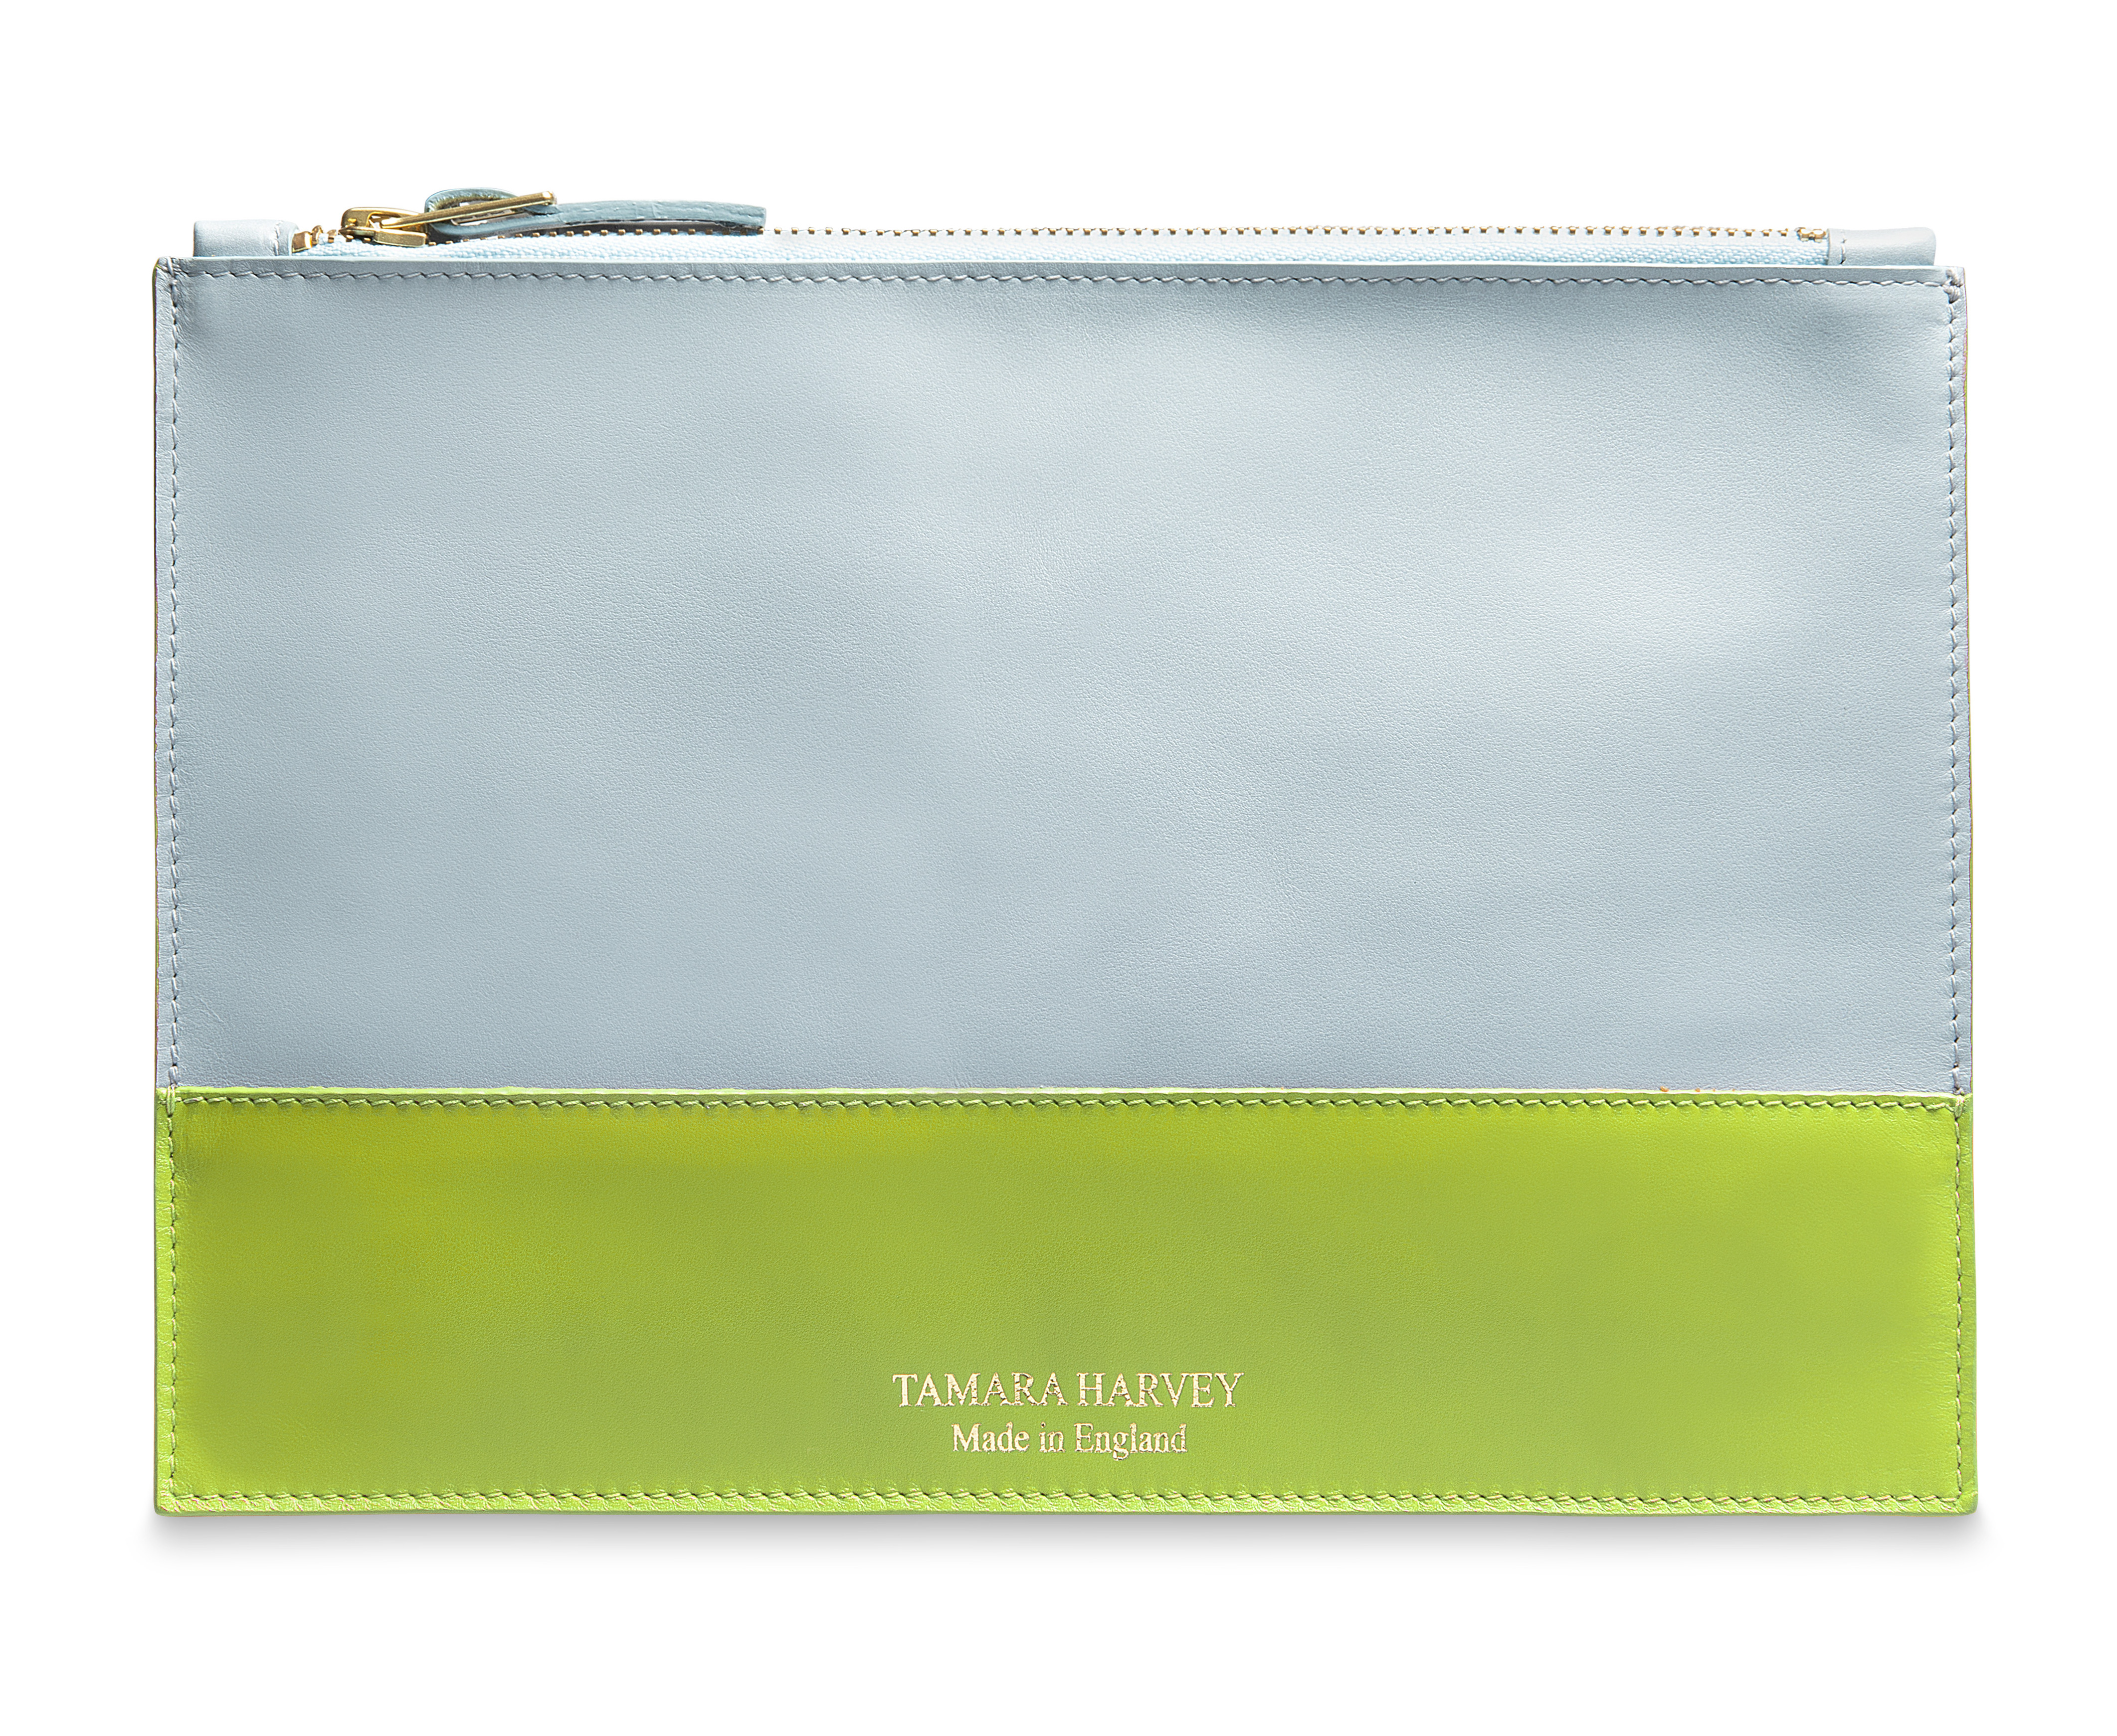 Duck Egg Blue and Lime Green Leather Zip Pouch